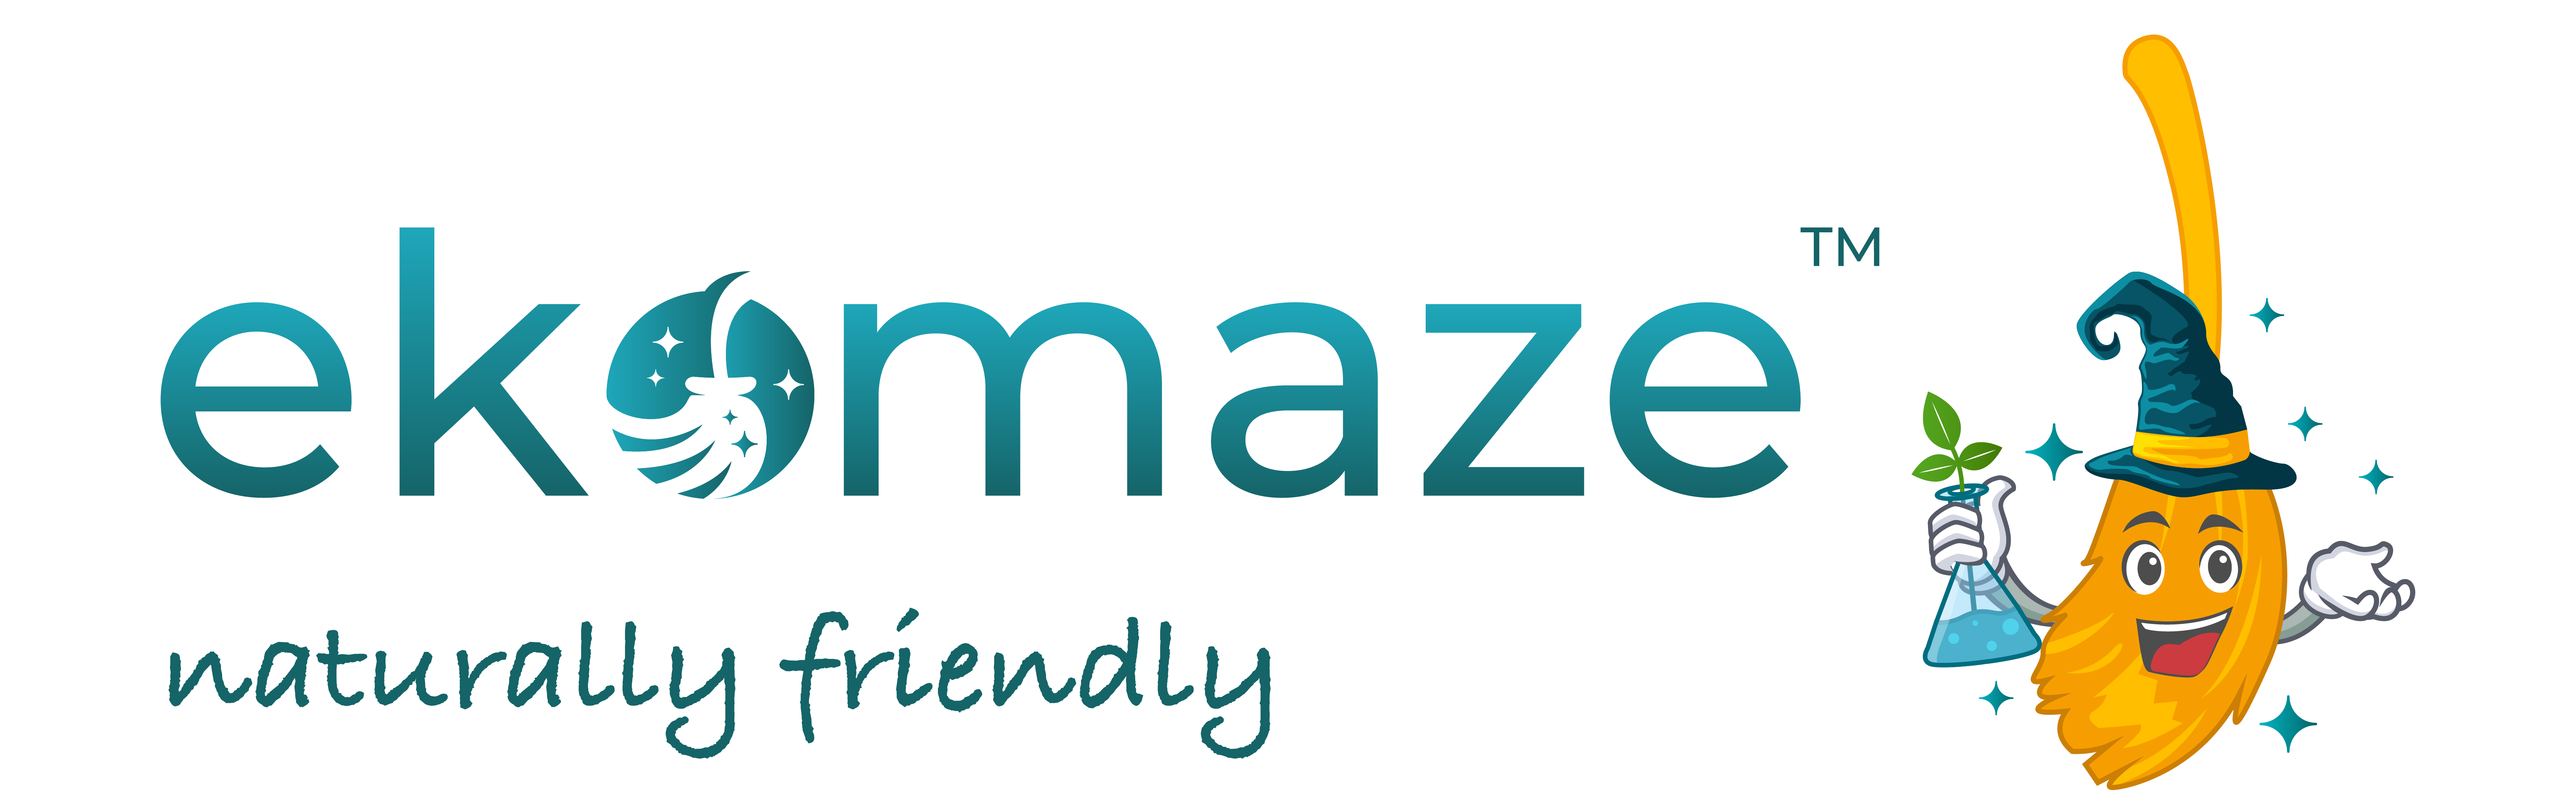 A sustainable clean revolution is coming | ekomaze.com